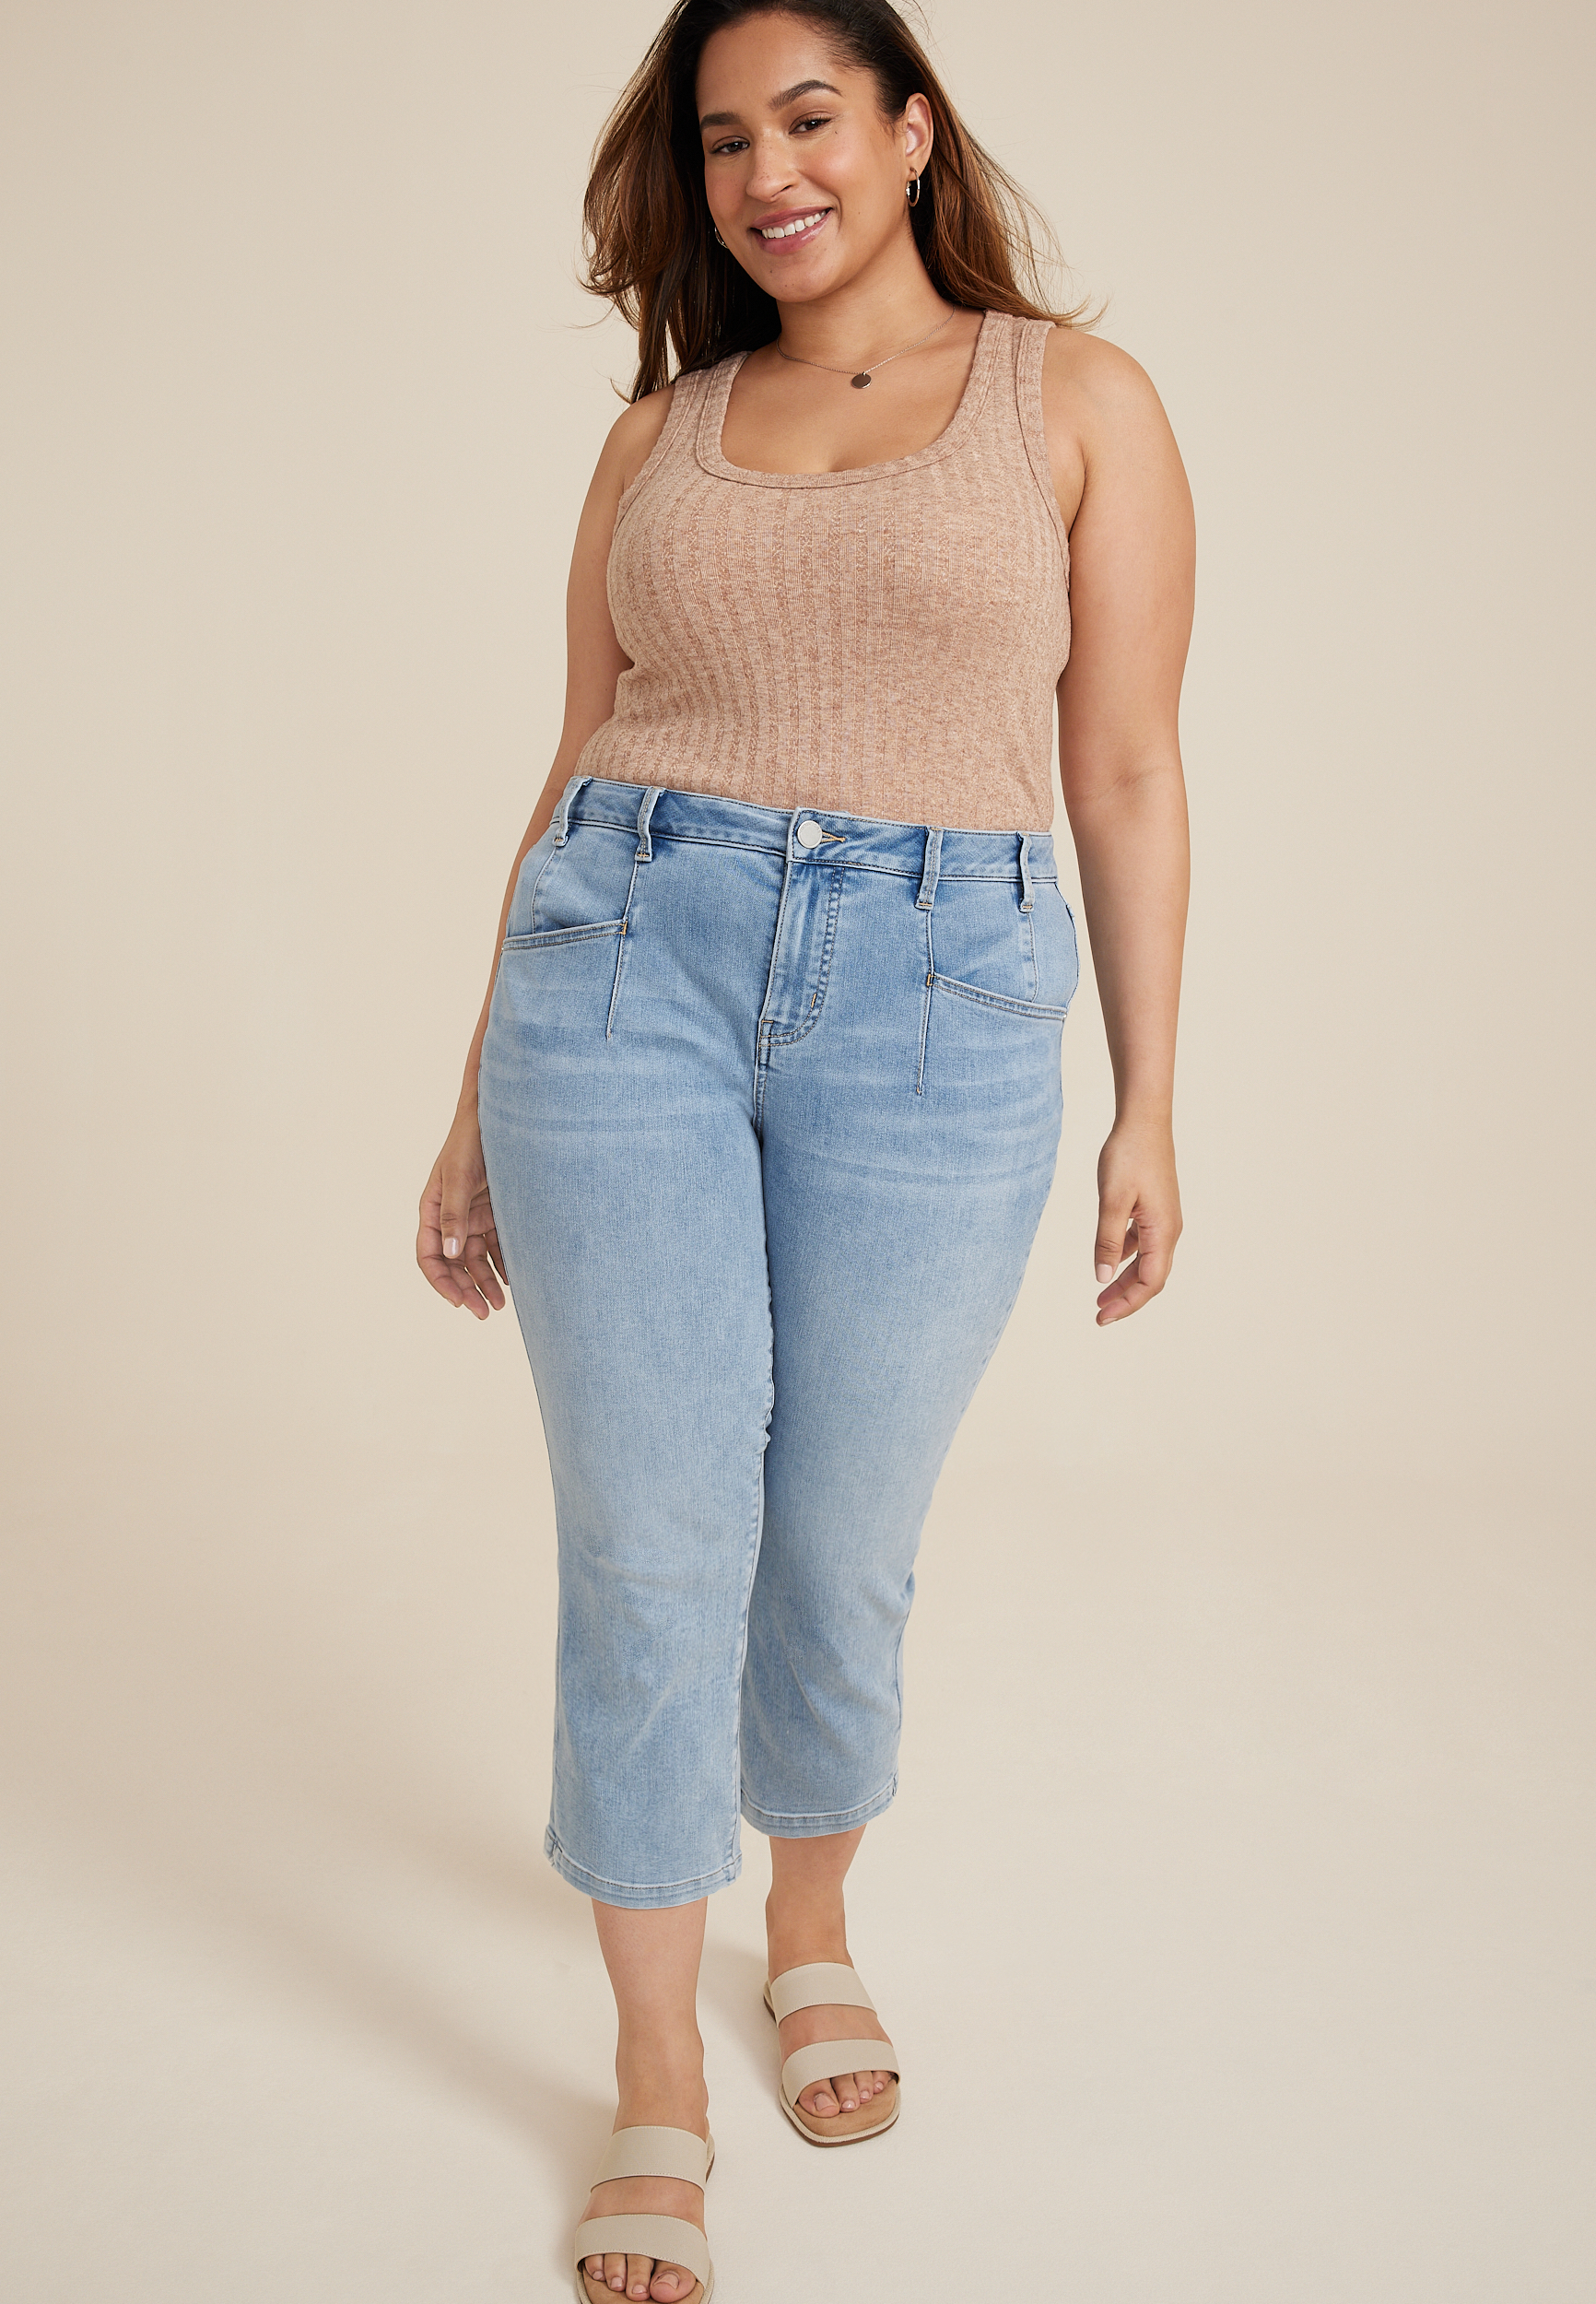 Plus m jeans by maurices™ Everflex™ Curvy High Rise Seamed Waist Cropped Jean